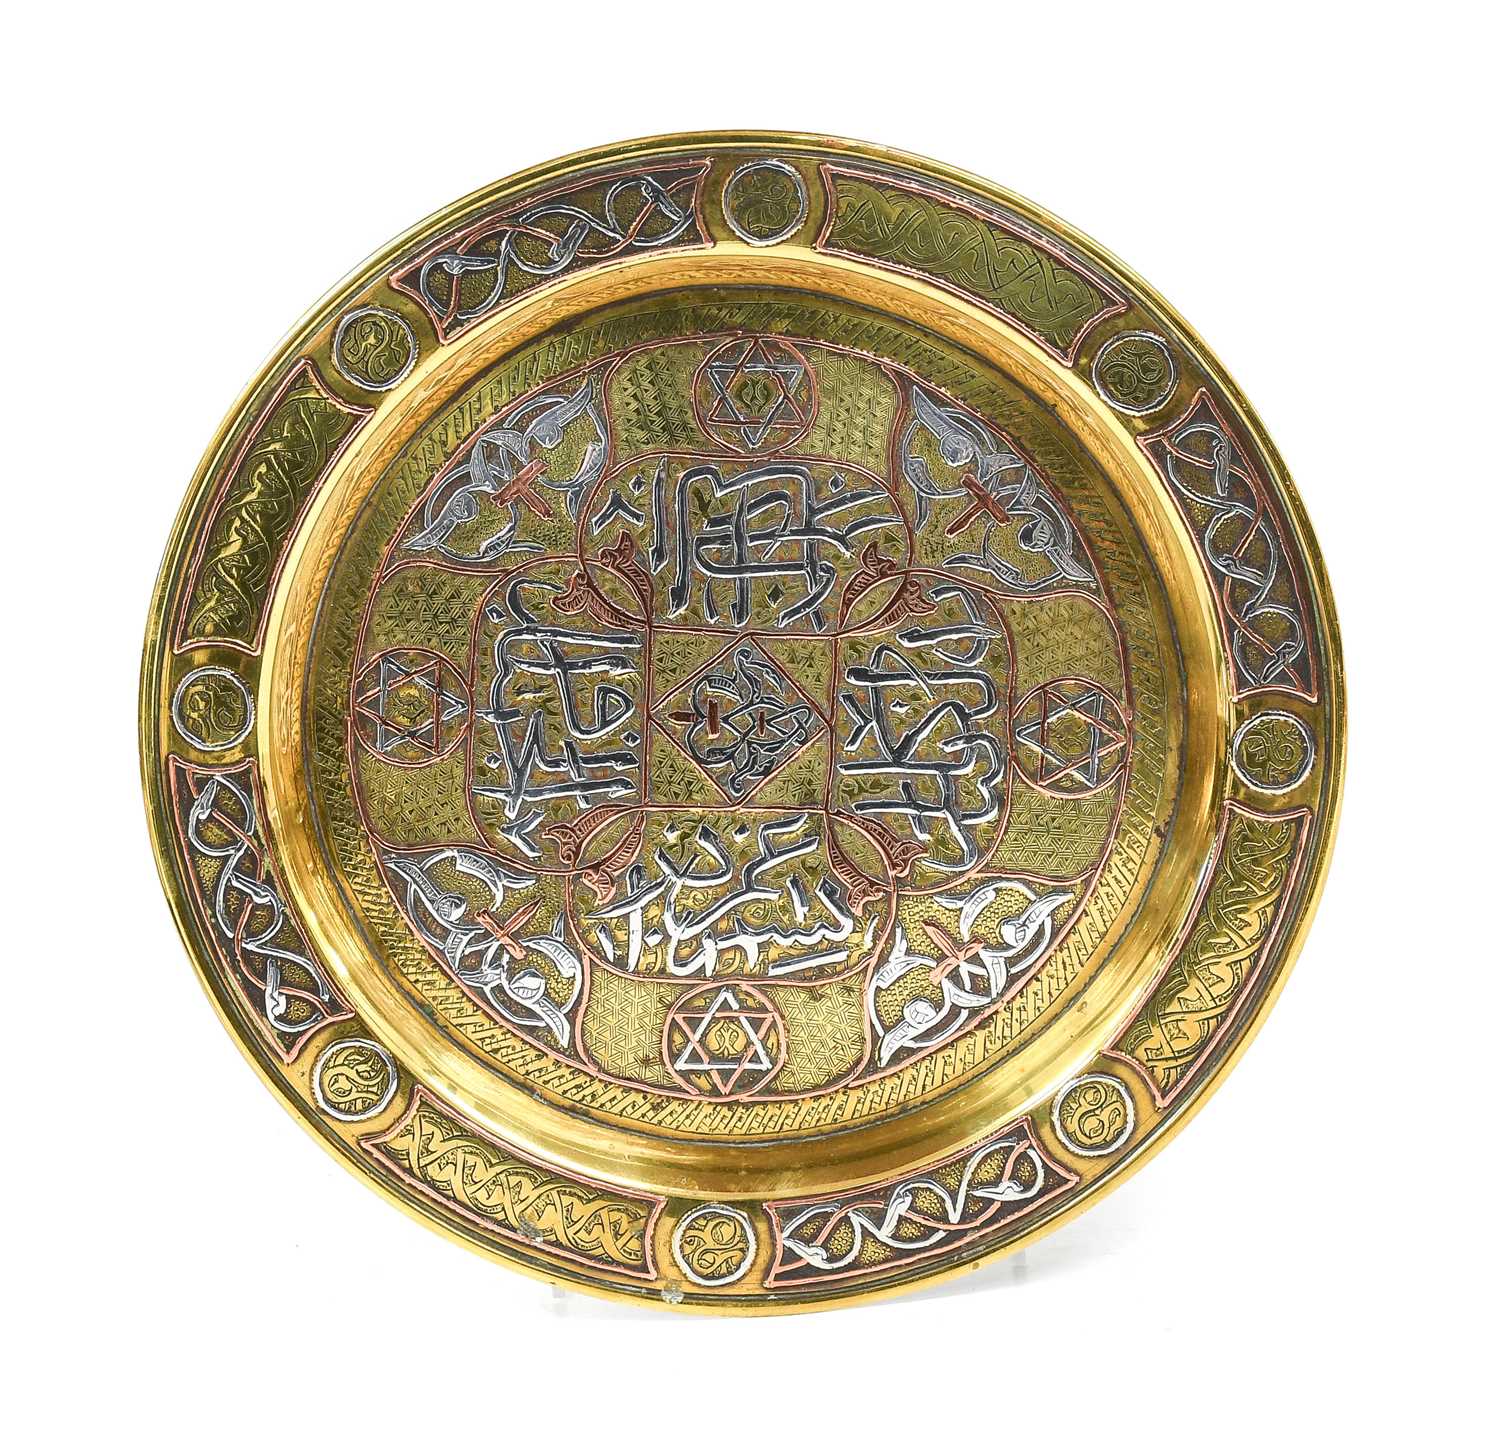 A Cairoware Circular Tray, late 19th/20th century, inlaid in copper and silver with a central - Image 2 of 5